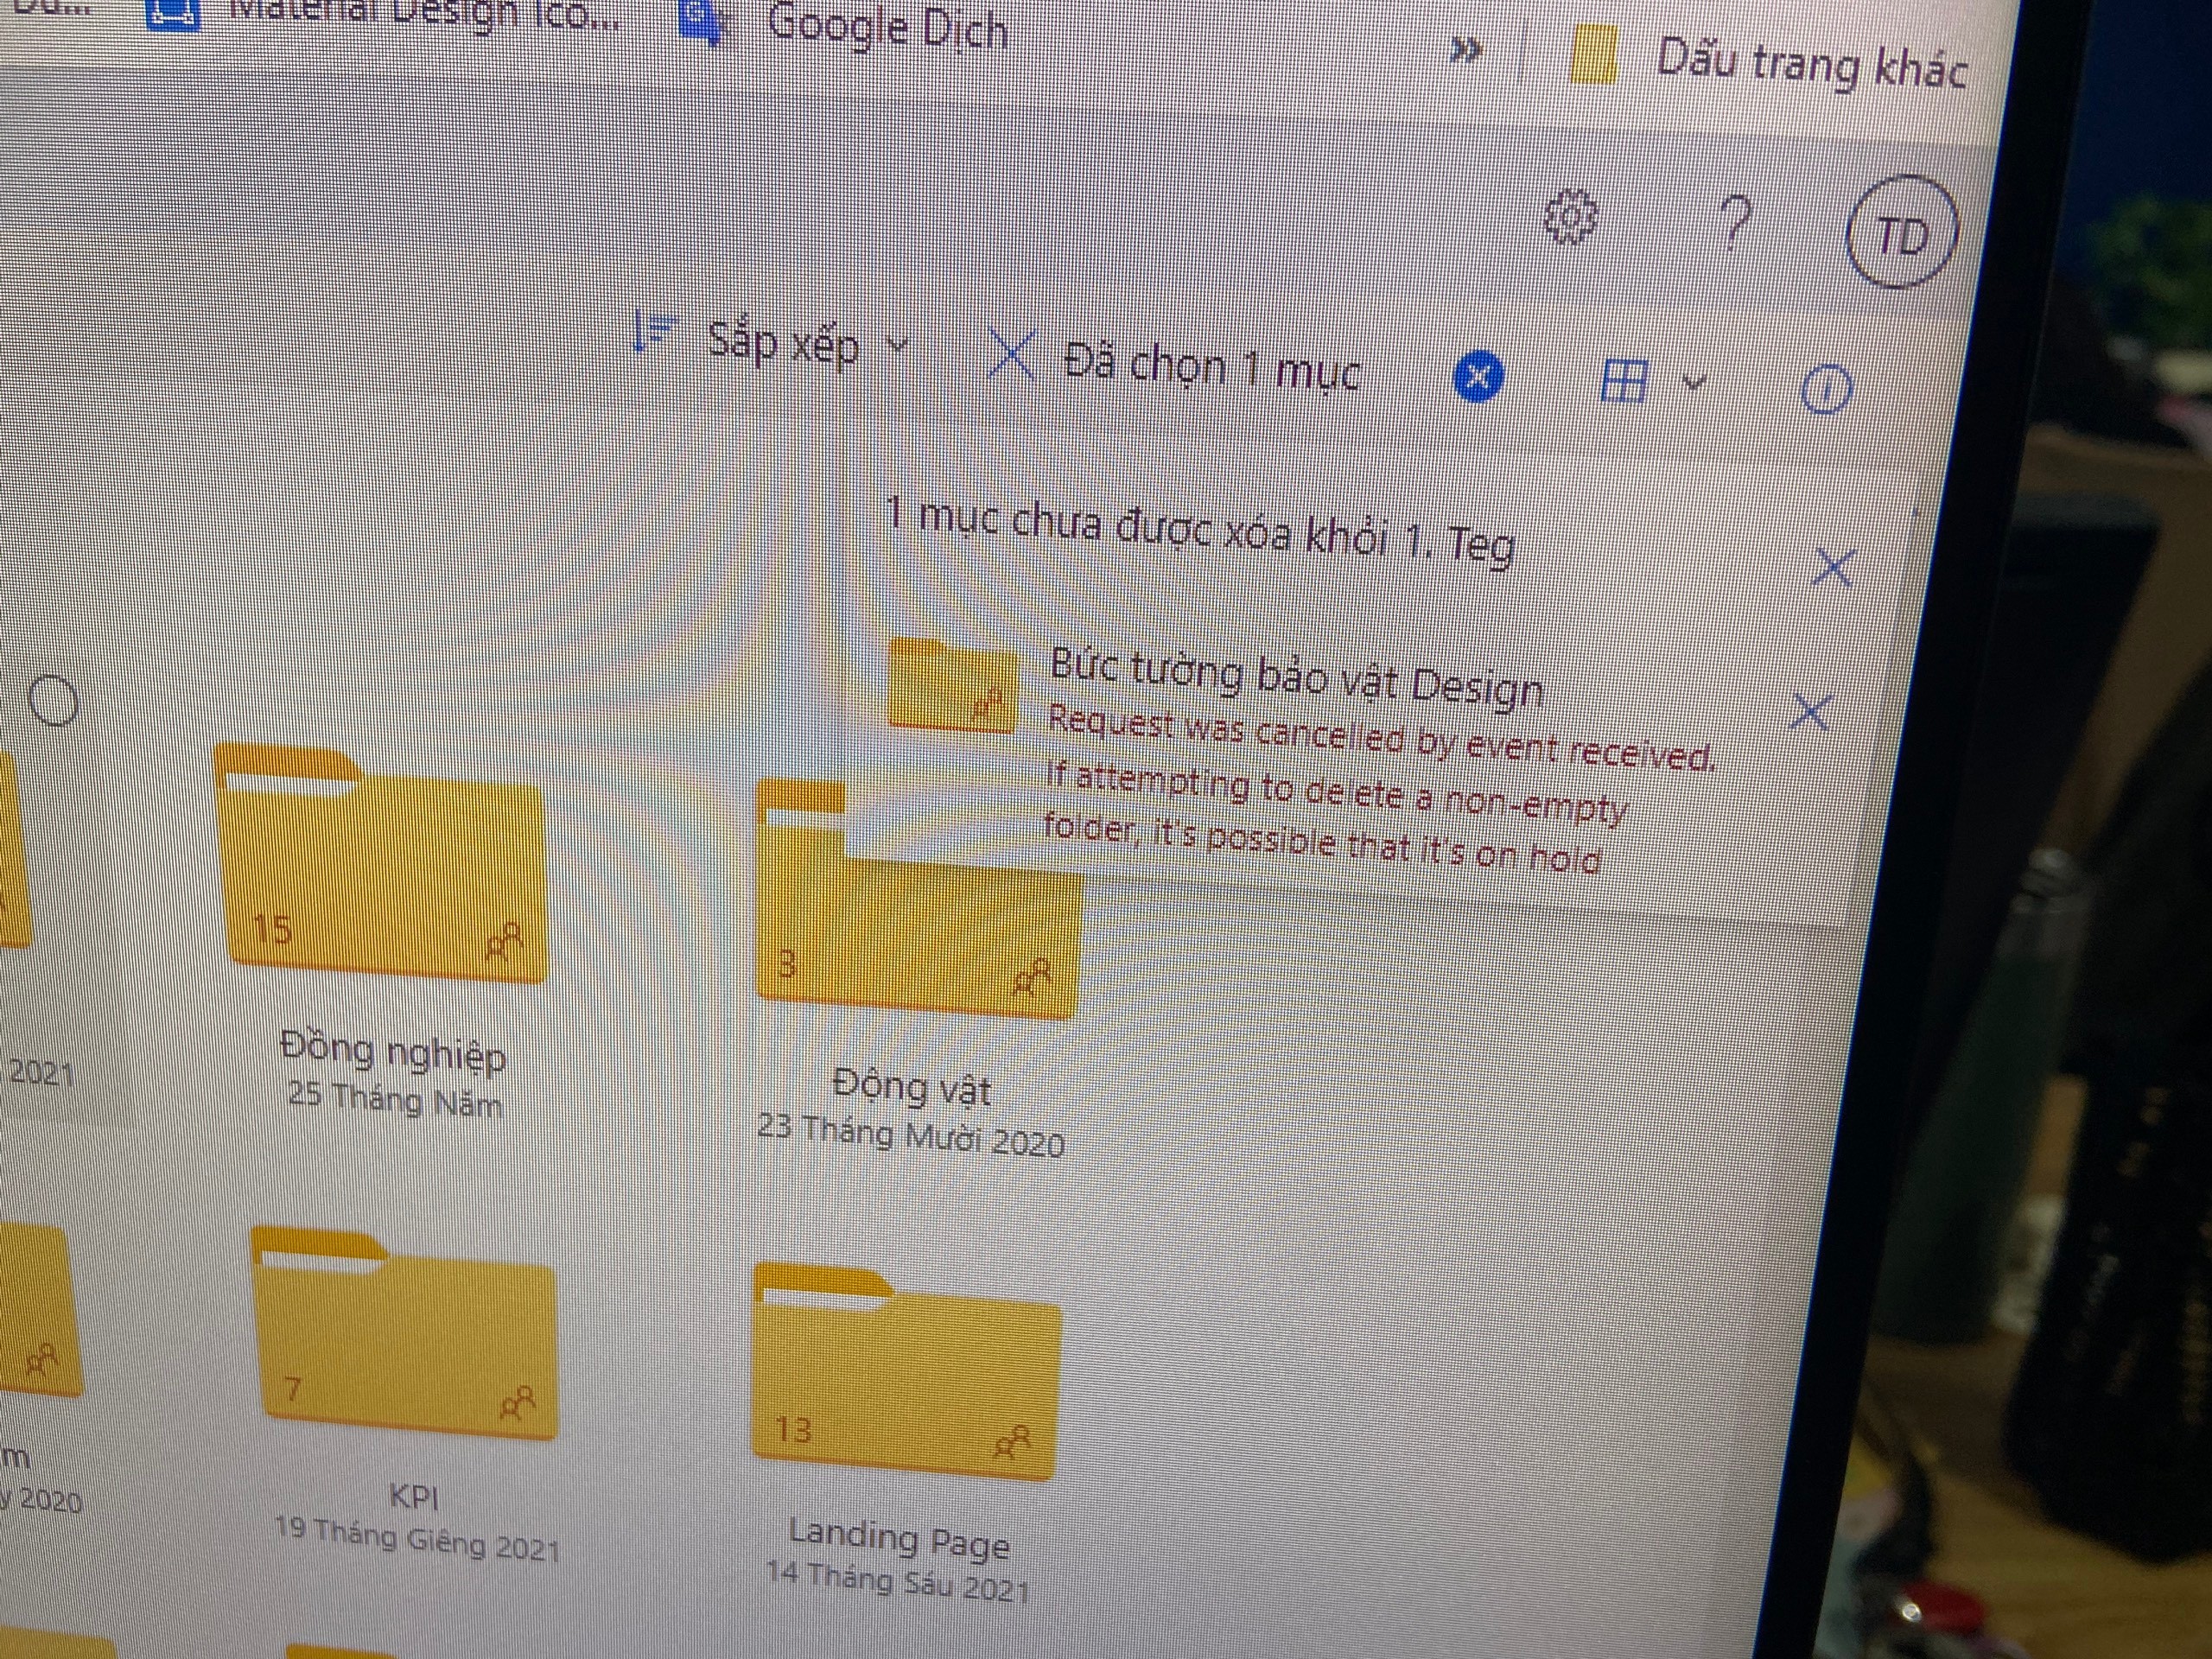 How to delete a file that does not exist? - Microsoft Community